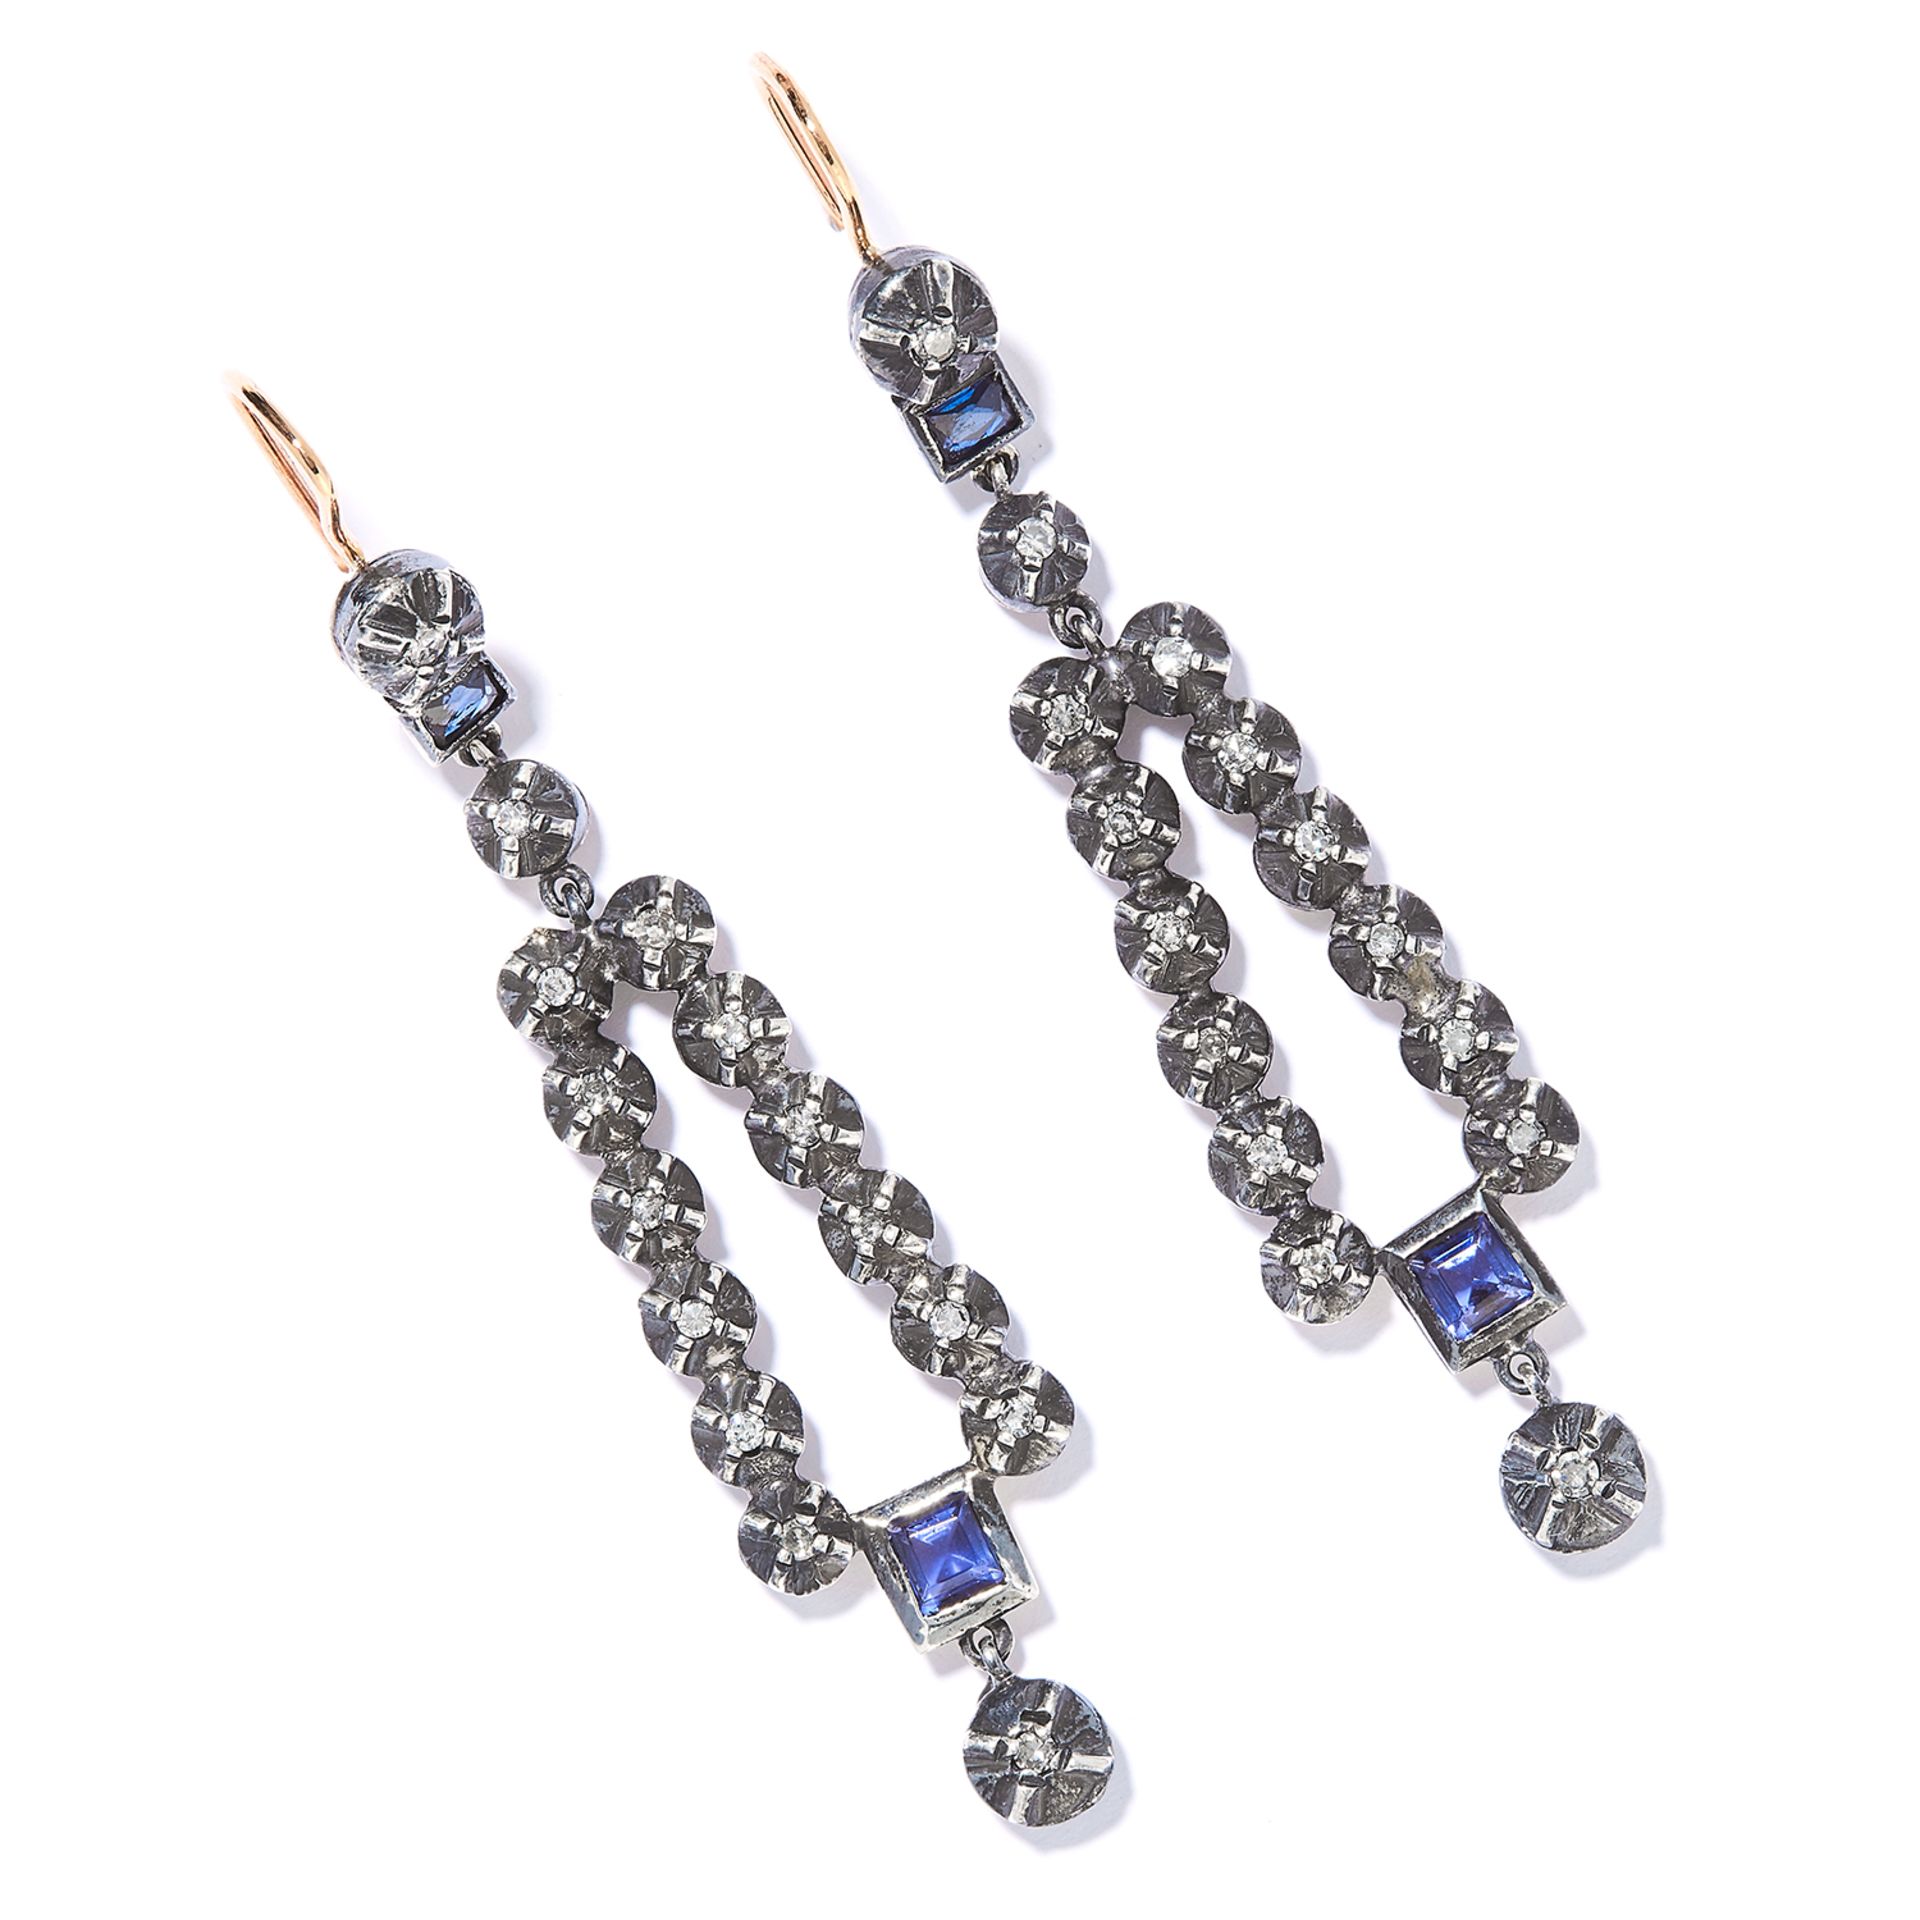 JEWELLED DIAMOND DROP EARRINGS in yellow gold and silver, the tapering bodies set with synthetic